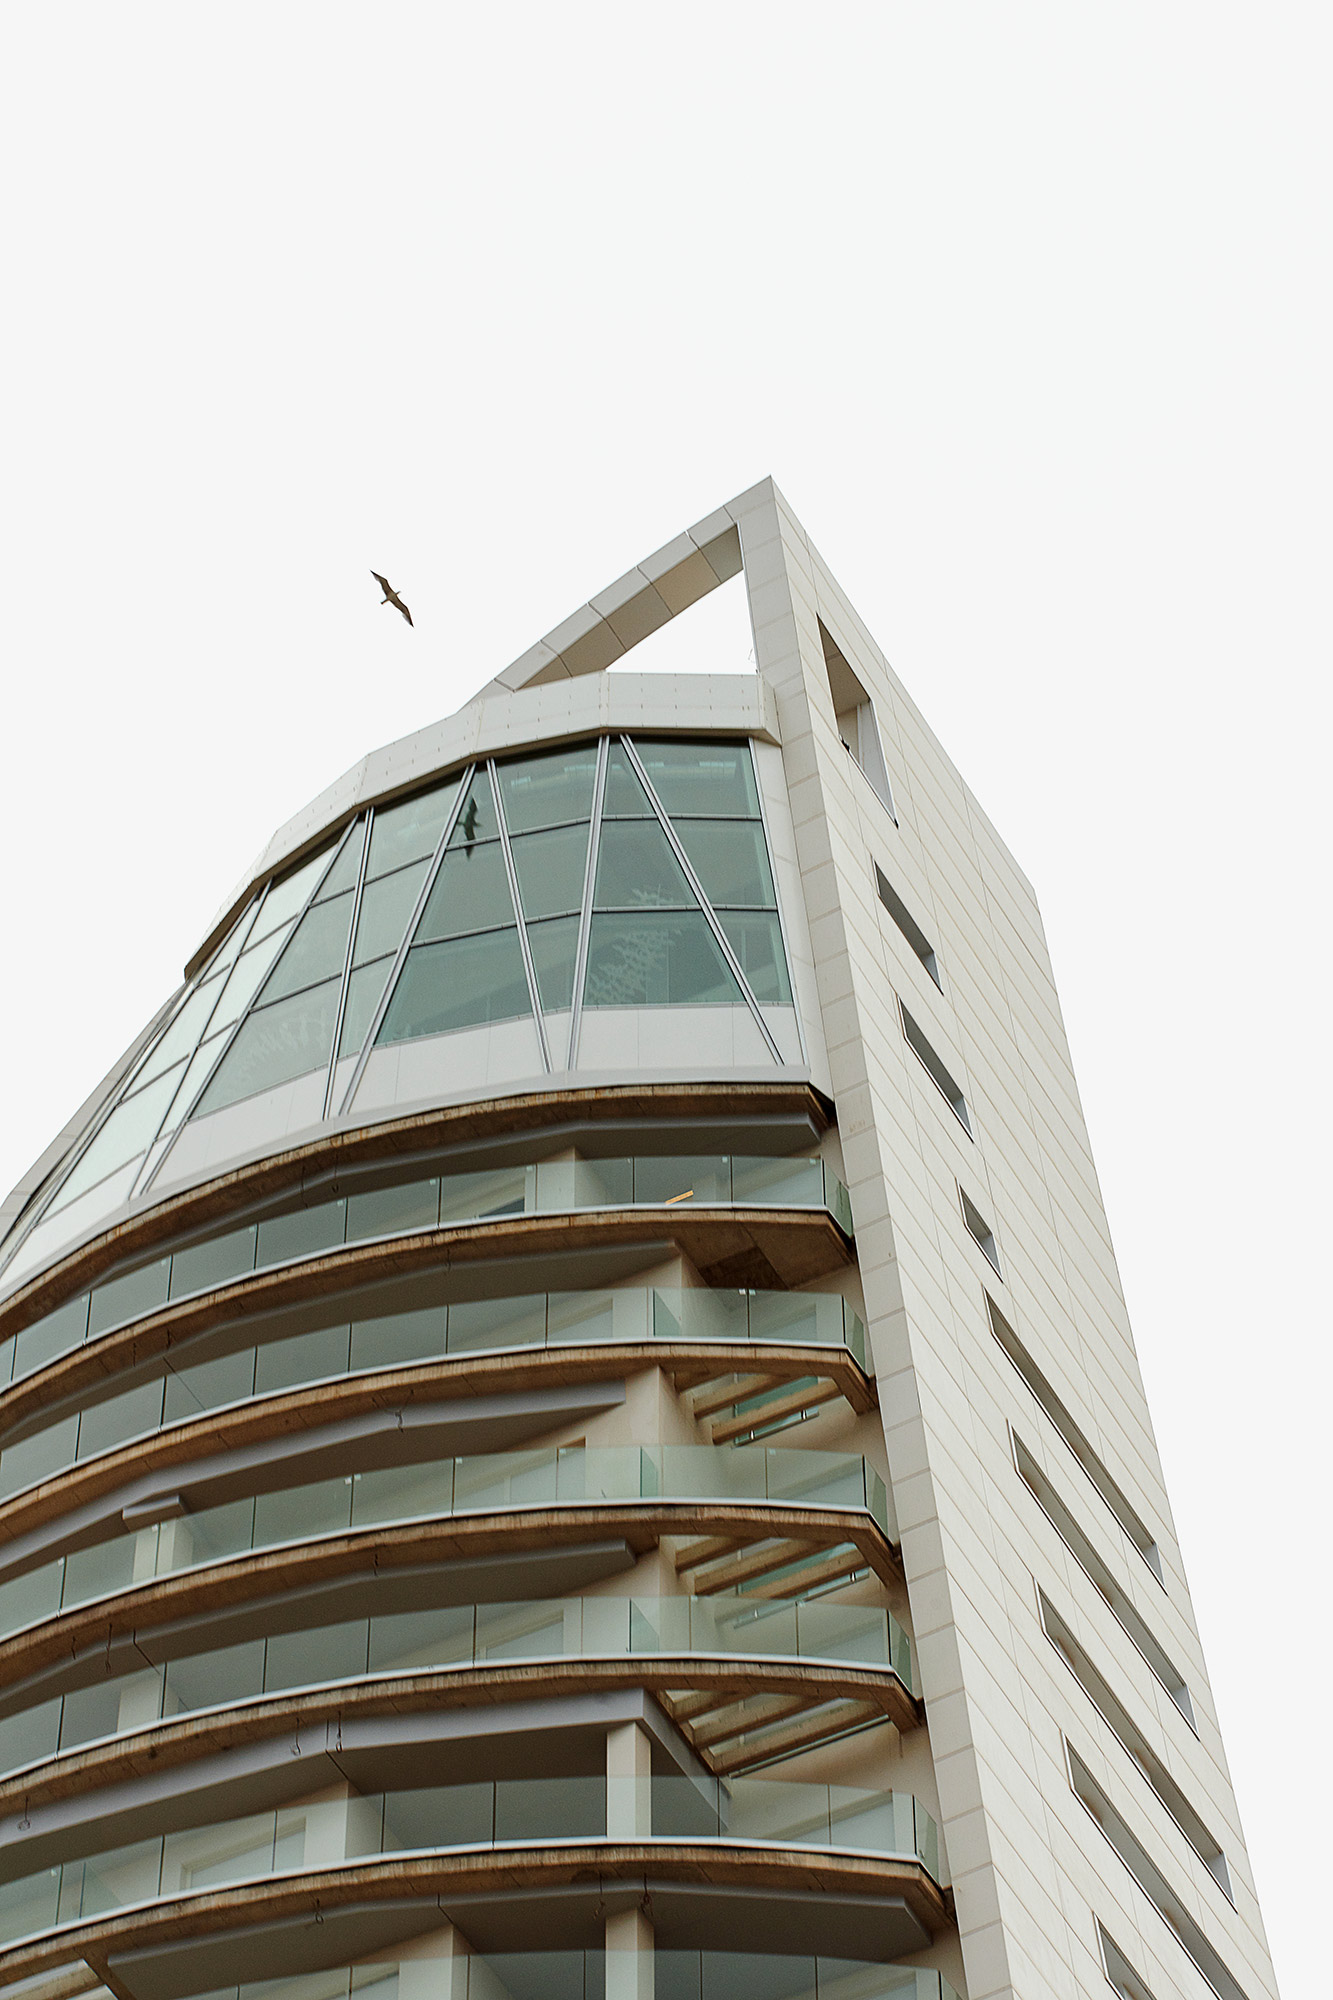 Image of delfin tower benidorm 3 in Dekton presents the world’s first curved and ventilated façade made of ultra-compact stone - Cosentino